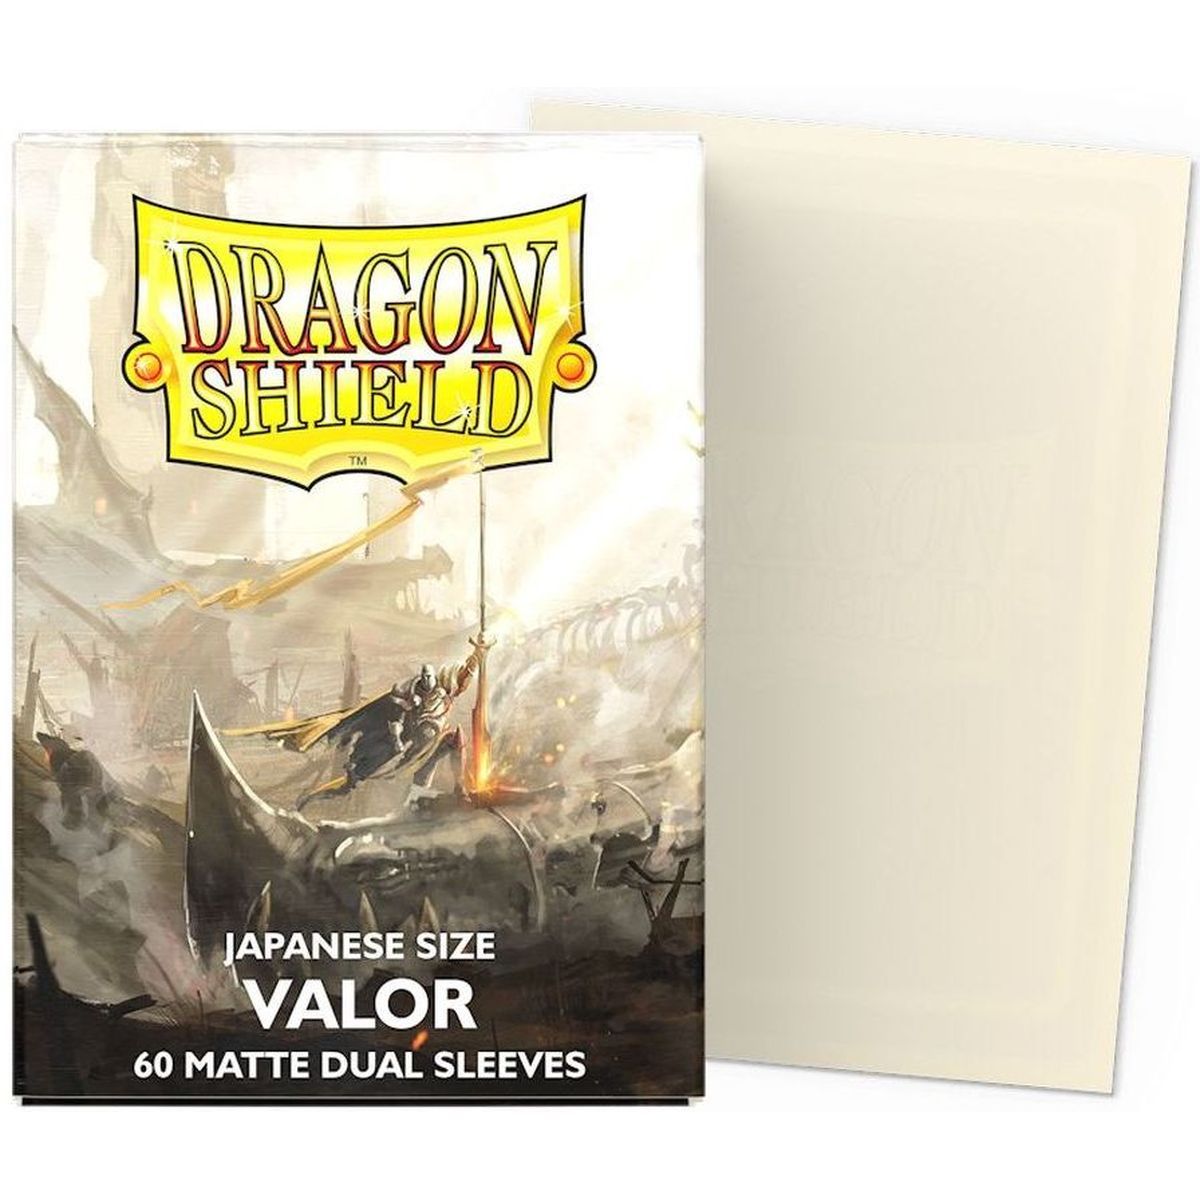 Item Dragon Shield - Small Sleeves - Japanese Size - Dual Matte Valor (60)